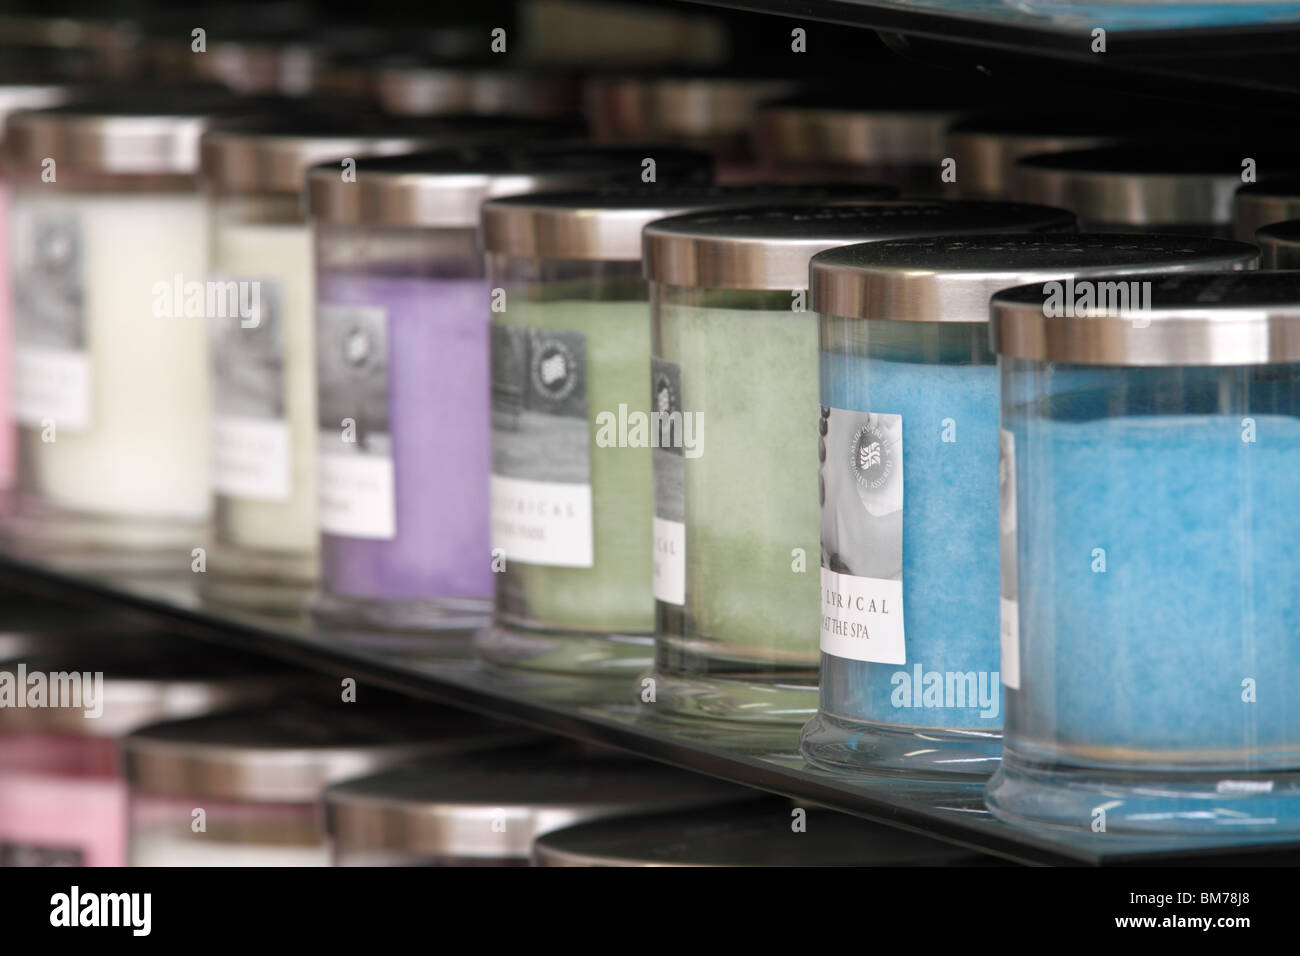 Wax Lyrical selection of scented candles Brookfields garden Centre, Nottingham Stock Photo